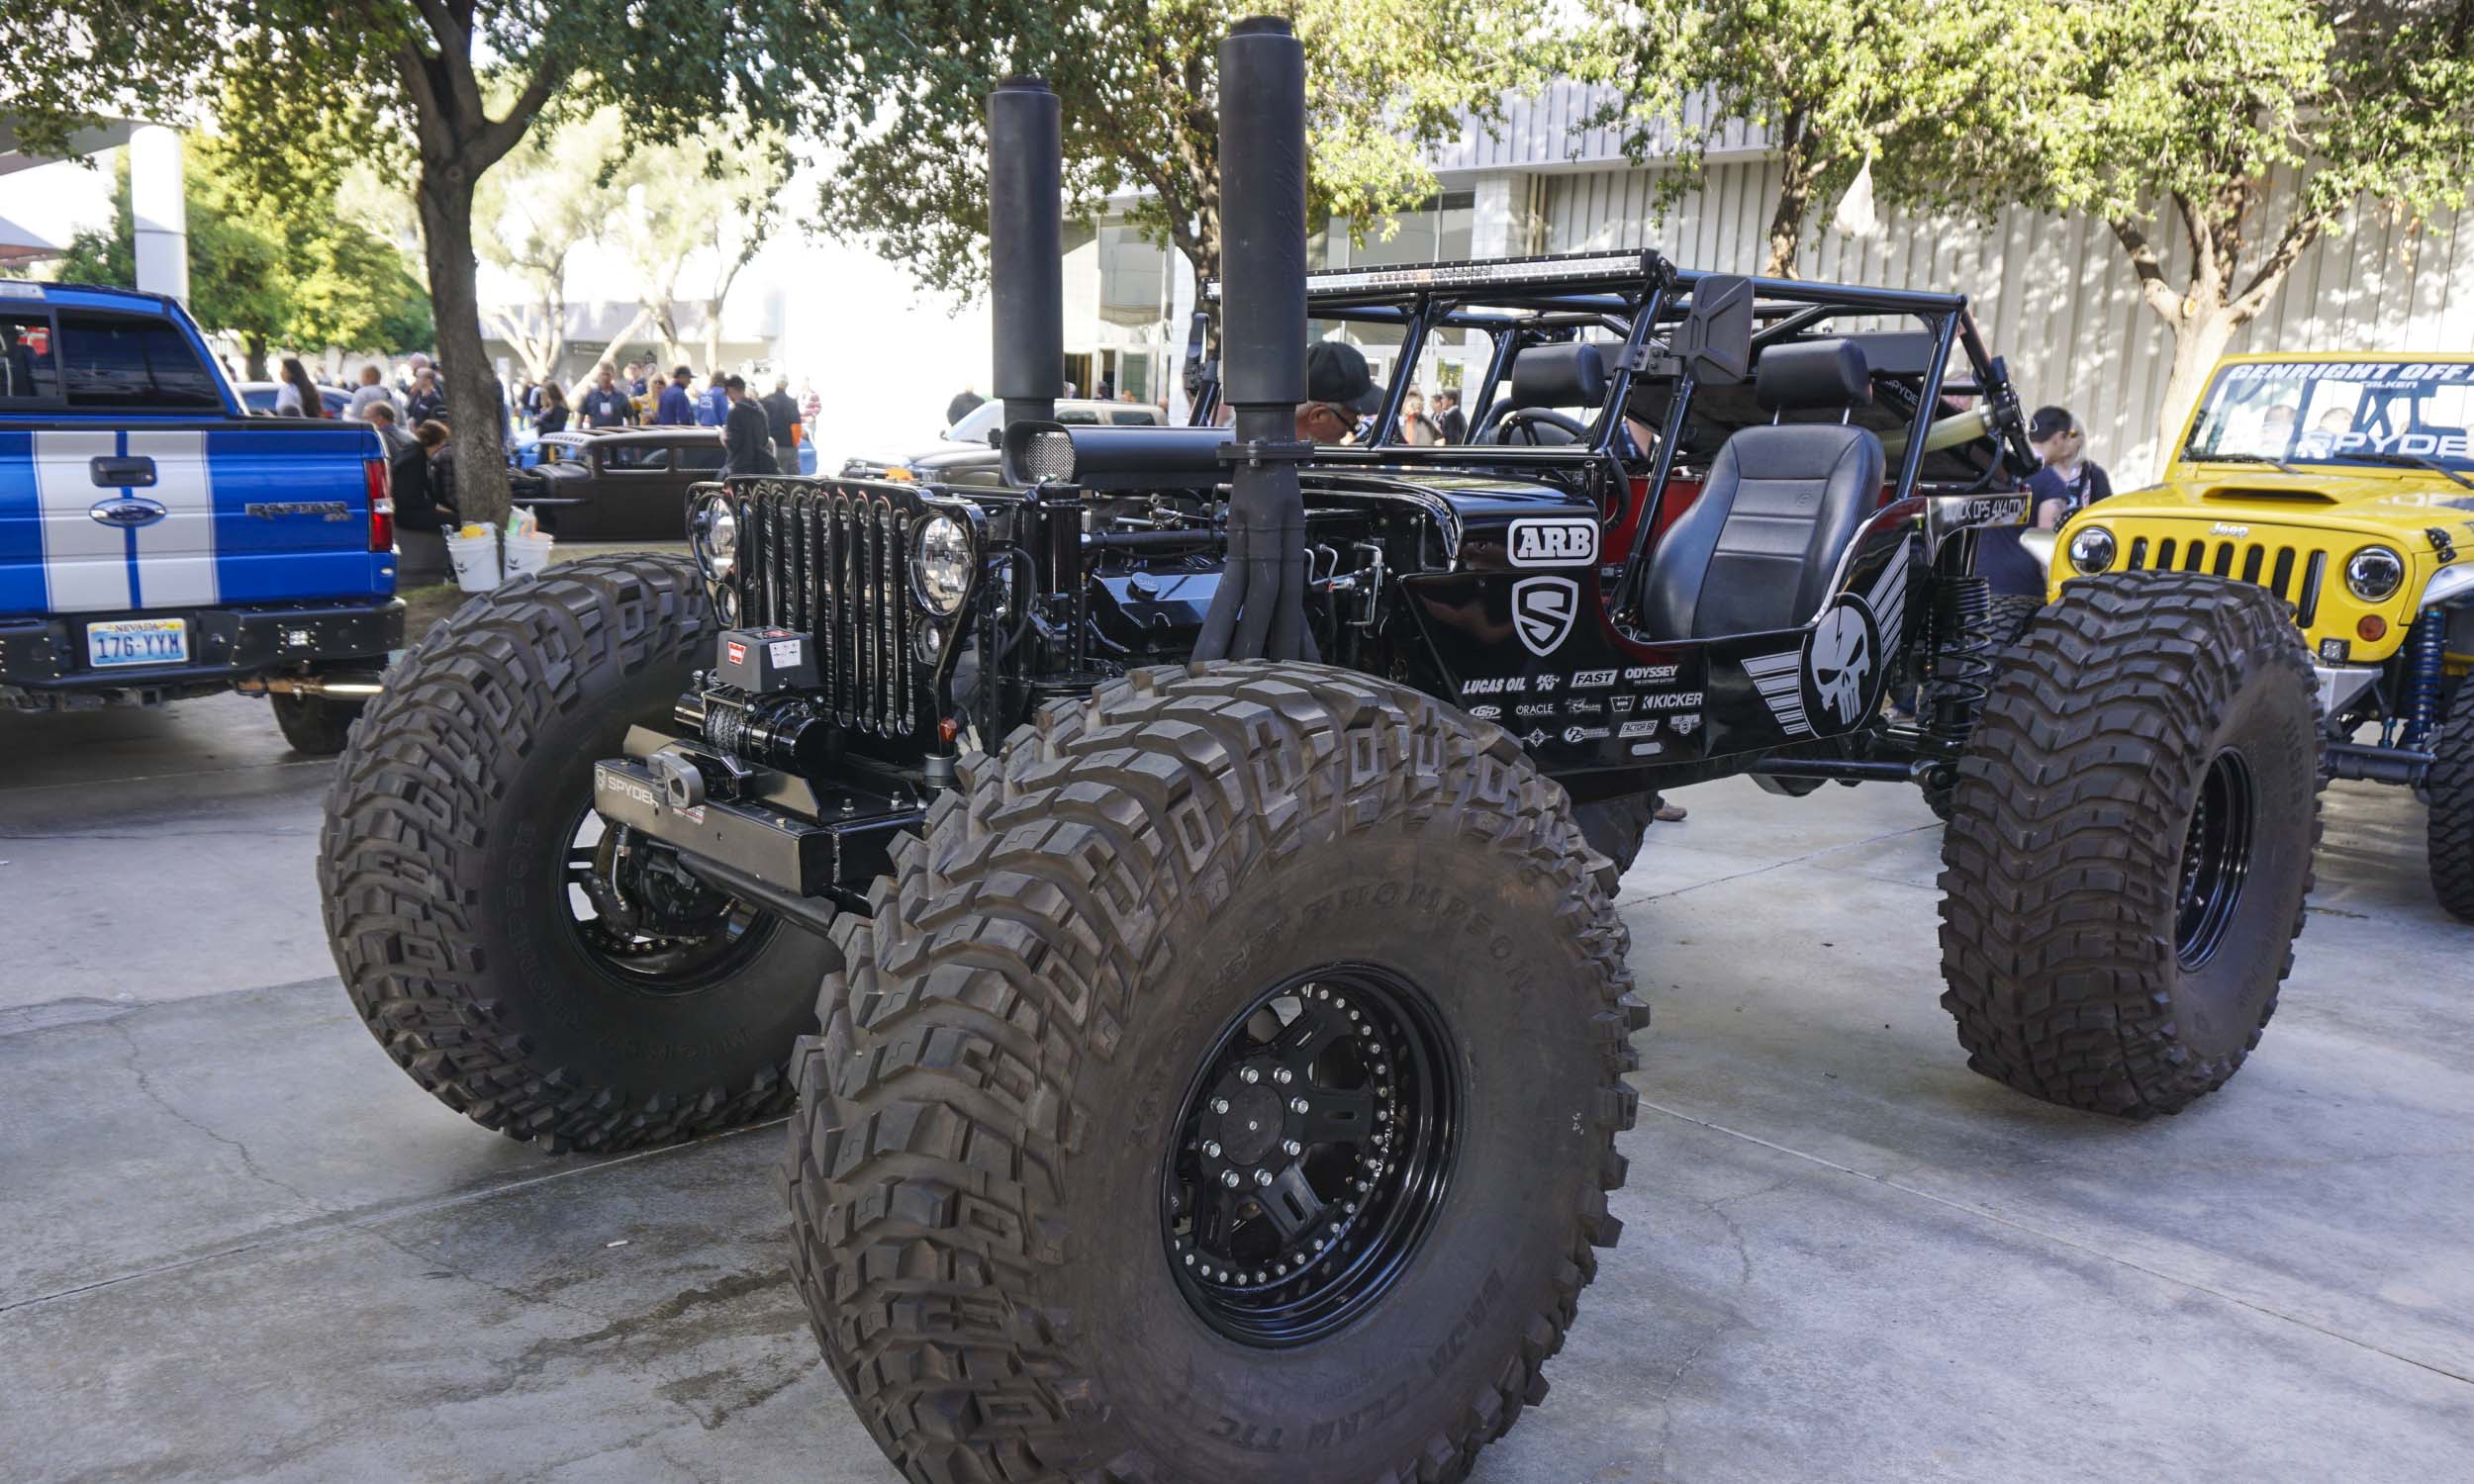 The Black Ops Jeep. This thing is Crazy! Photo: autocontentexp